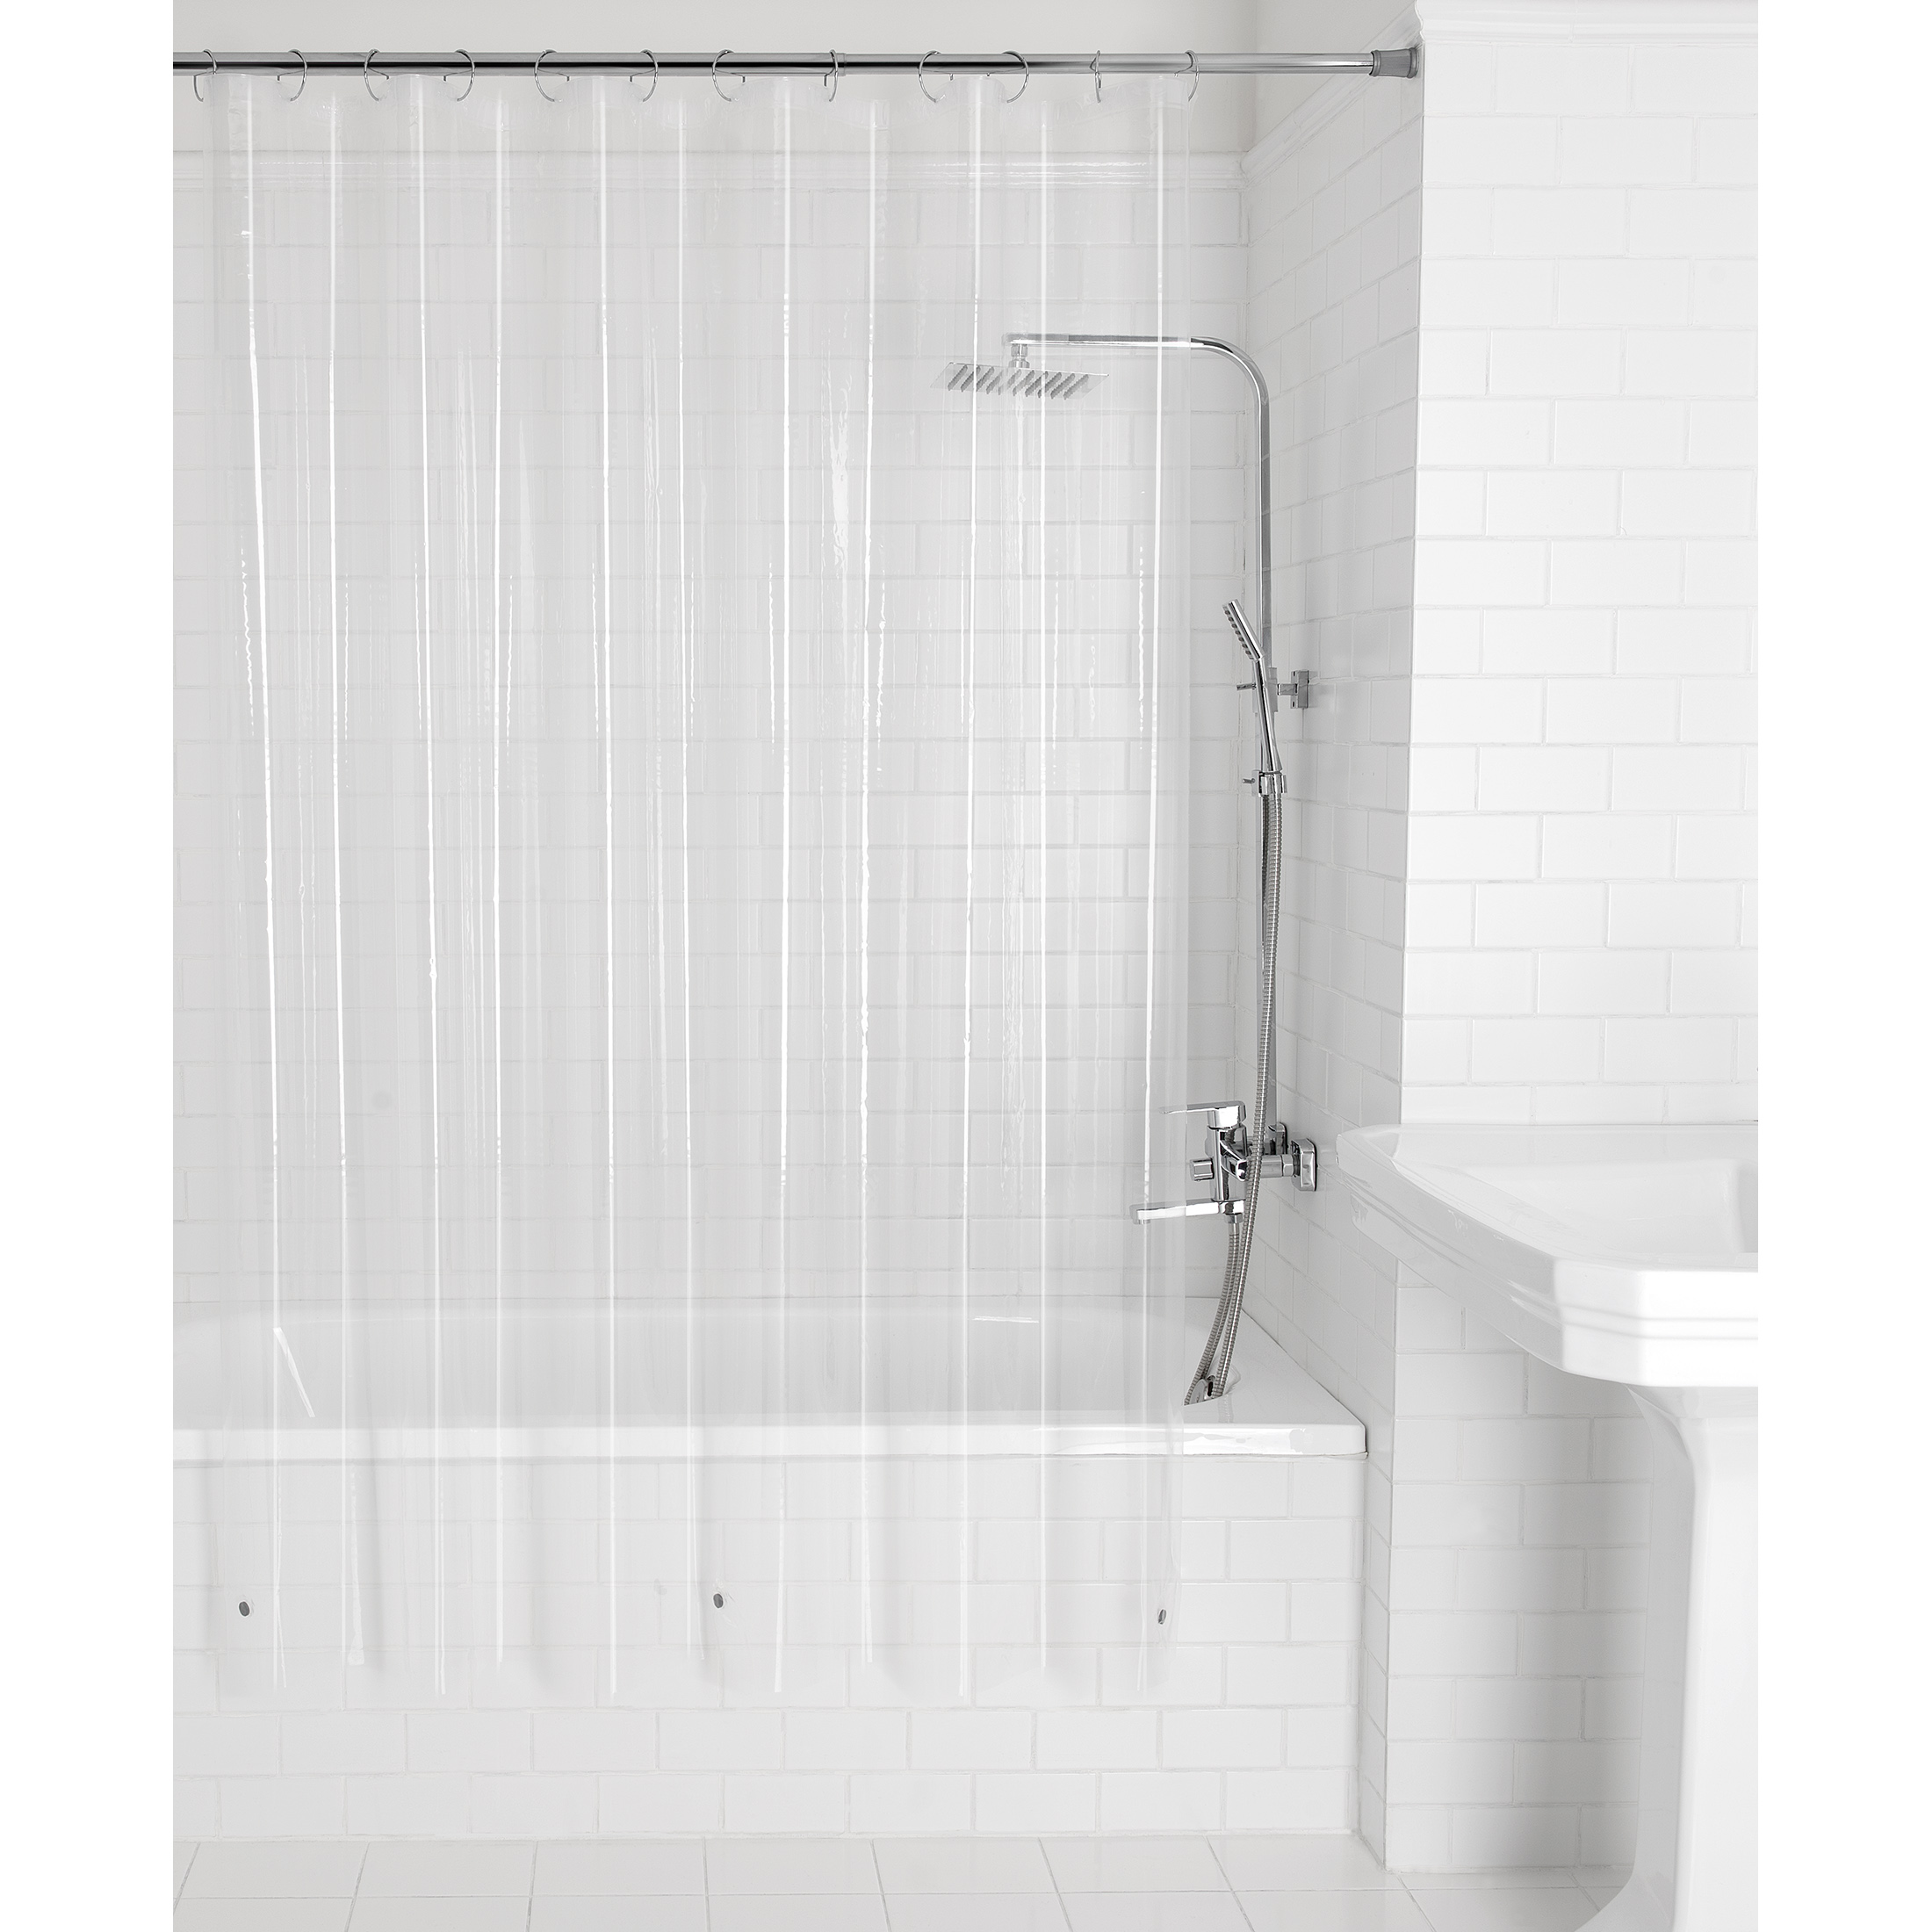 Mainstays Light Weight PEVA Shower Liner, Clear - image 1 of 8